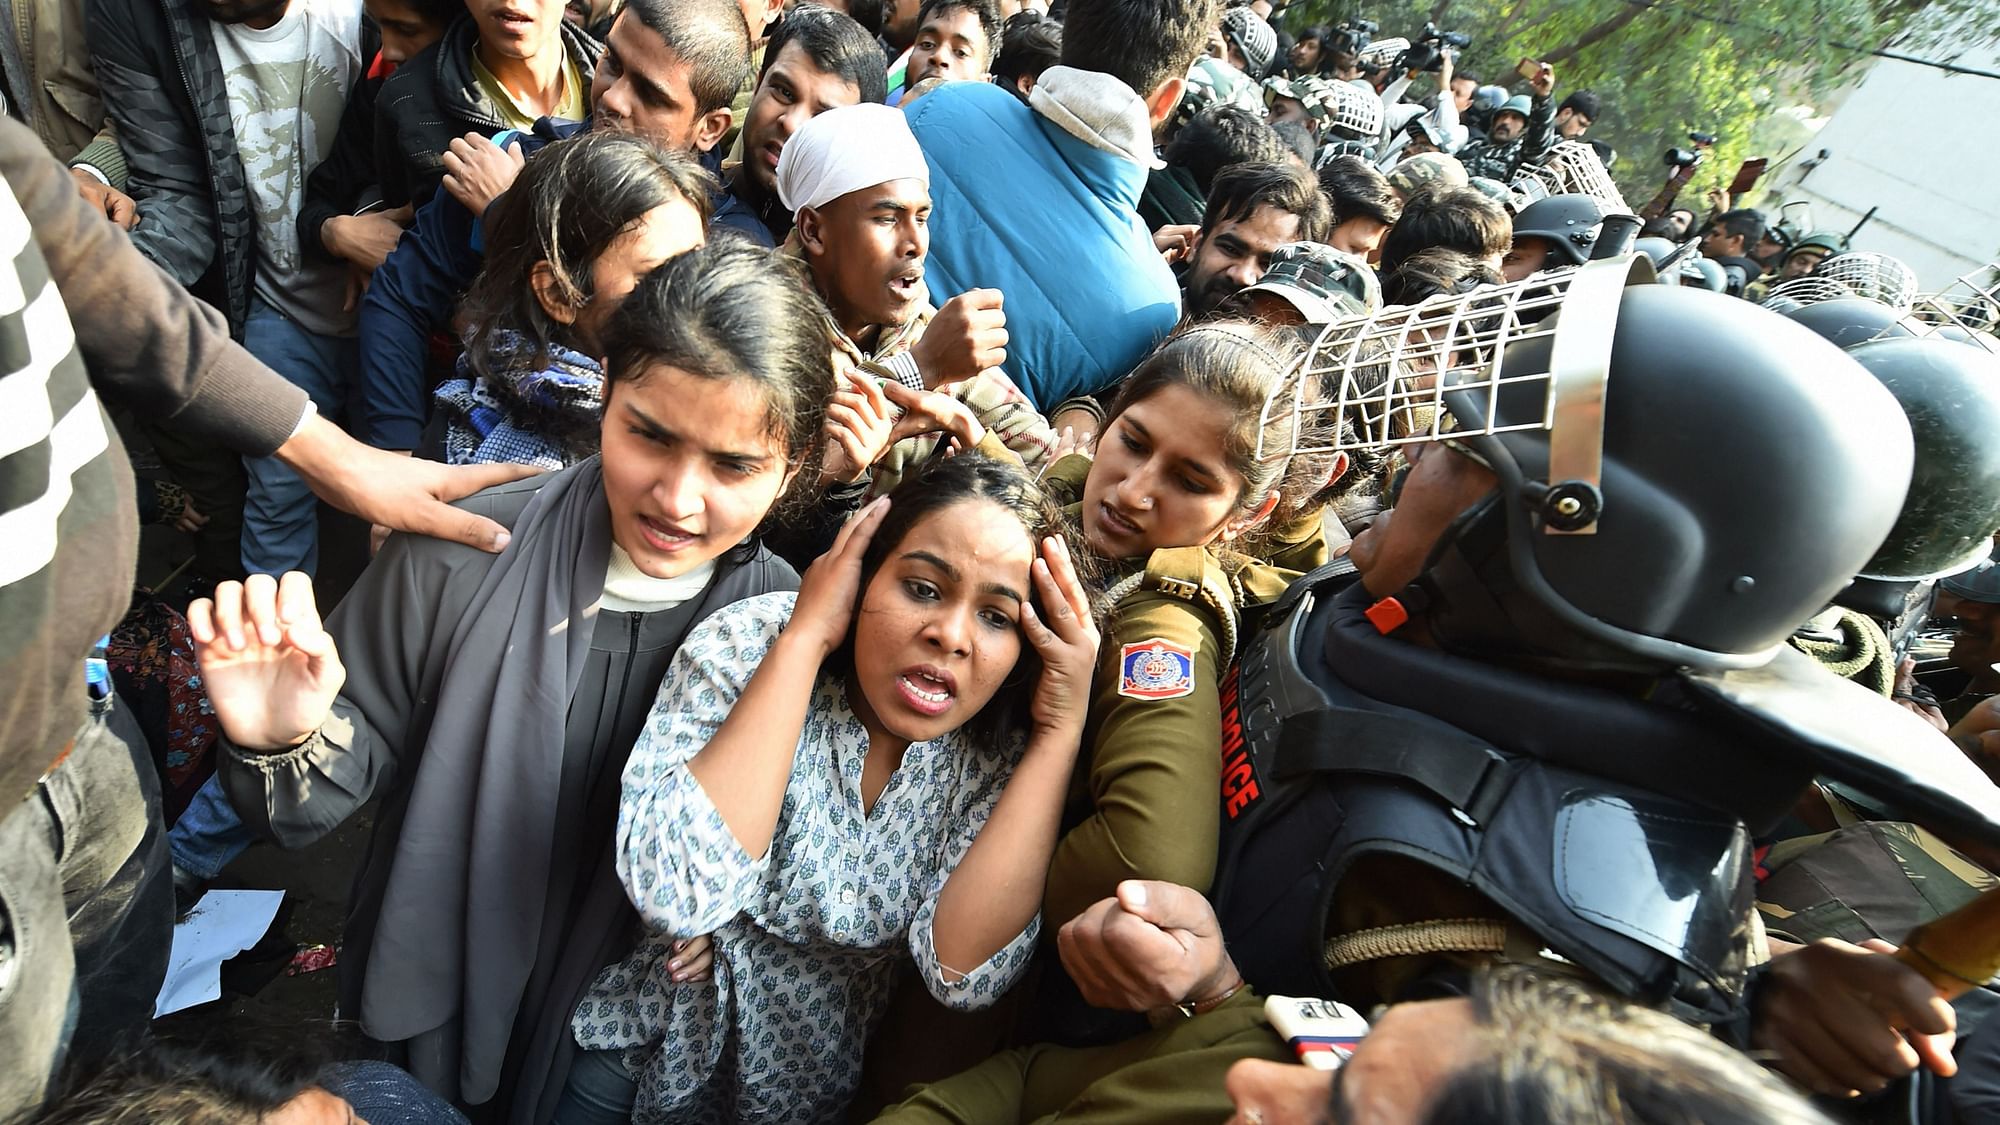 The police on Monday, 10 February, pushed back hundreds of protesters after stopping their protest march in Delhi’s Okhla.